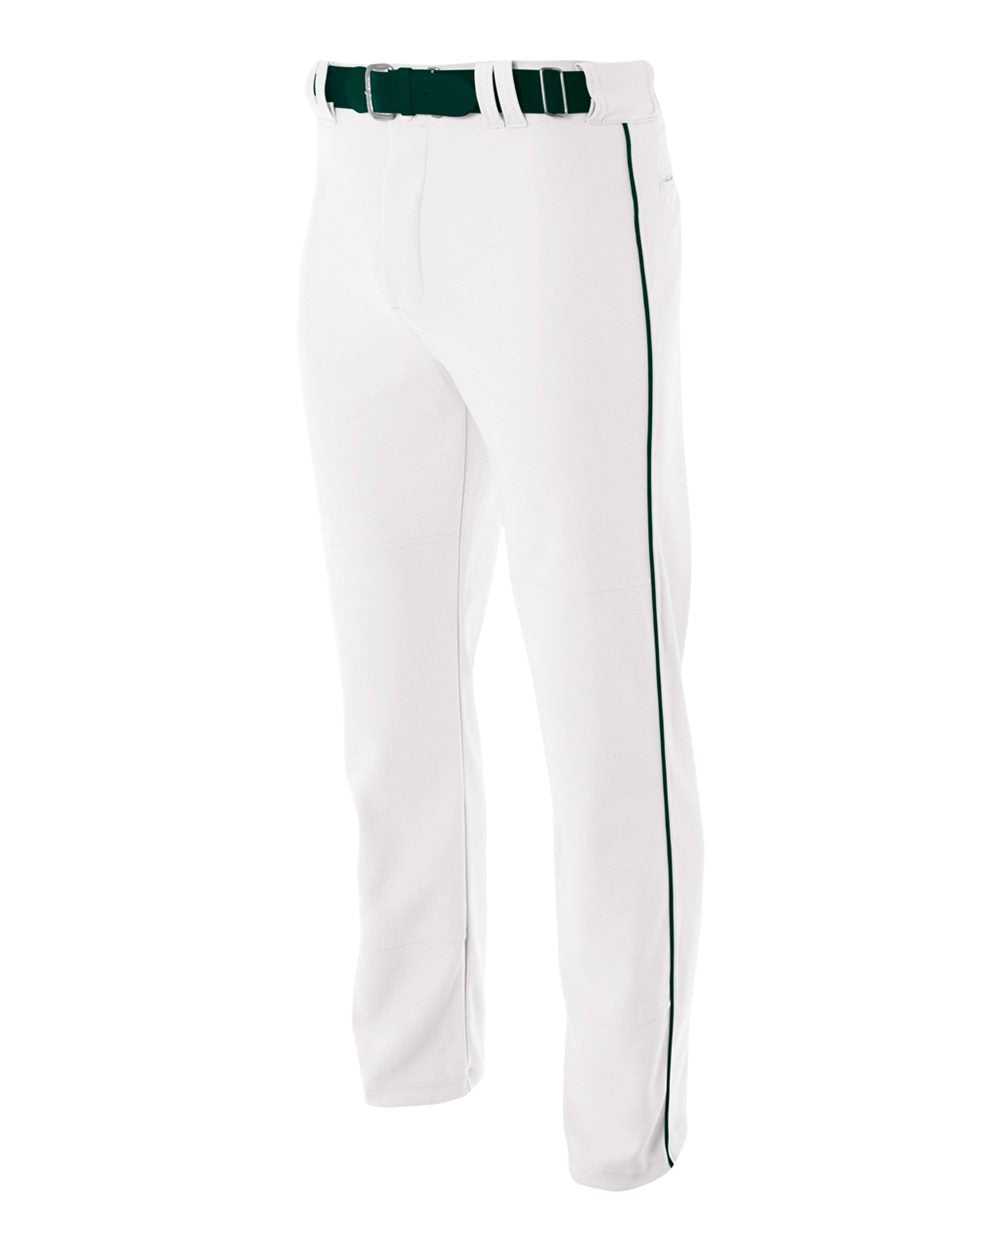 A4 N6162 Pro Style Open Bottom Baggy Cut Baseball Pant - White Forest - HIT a Double